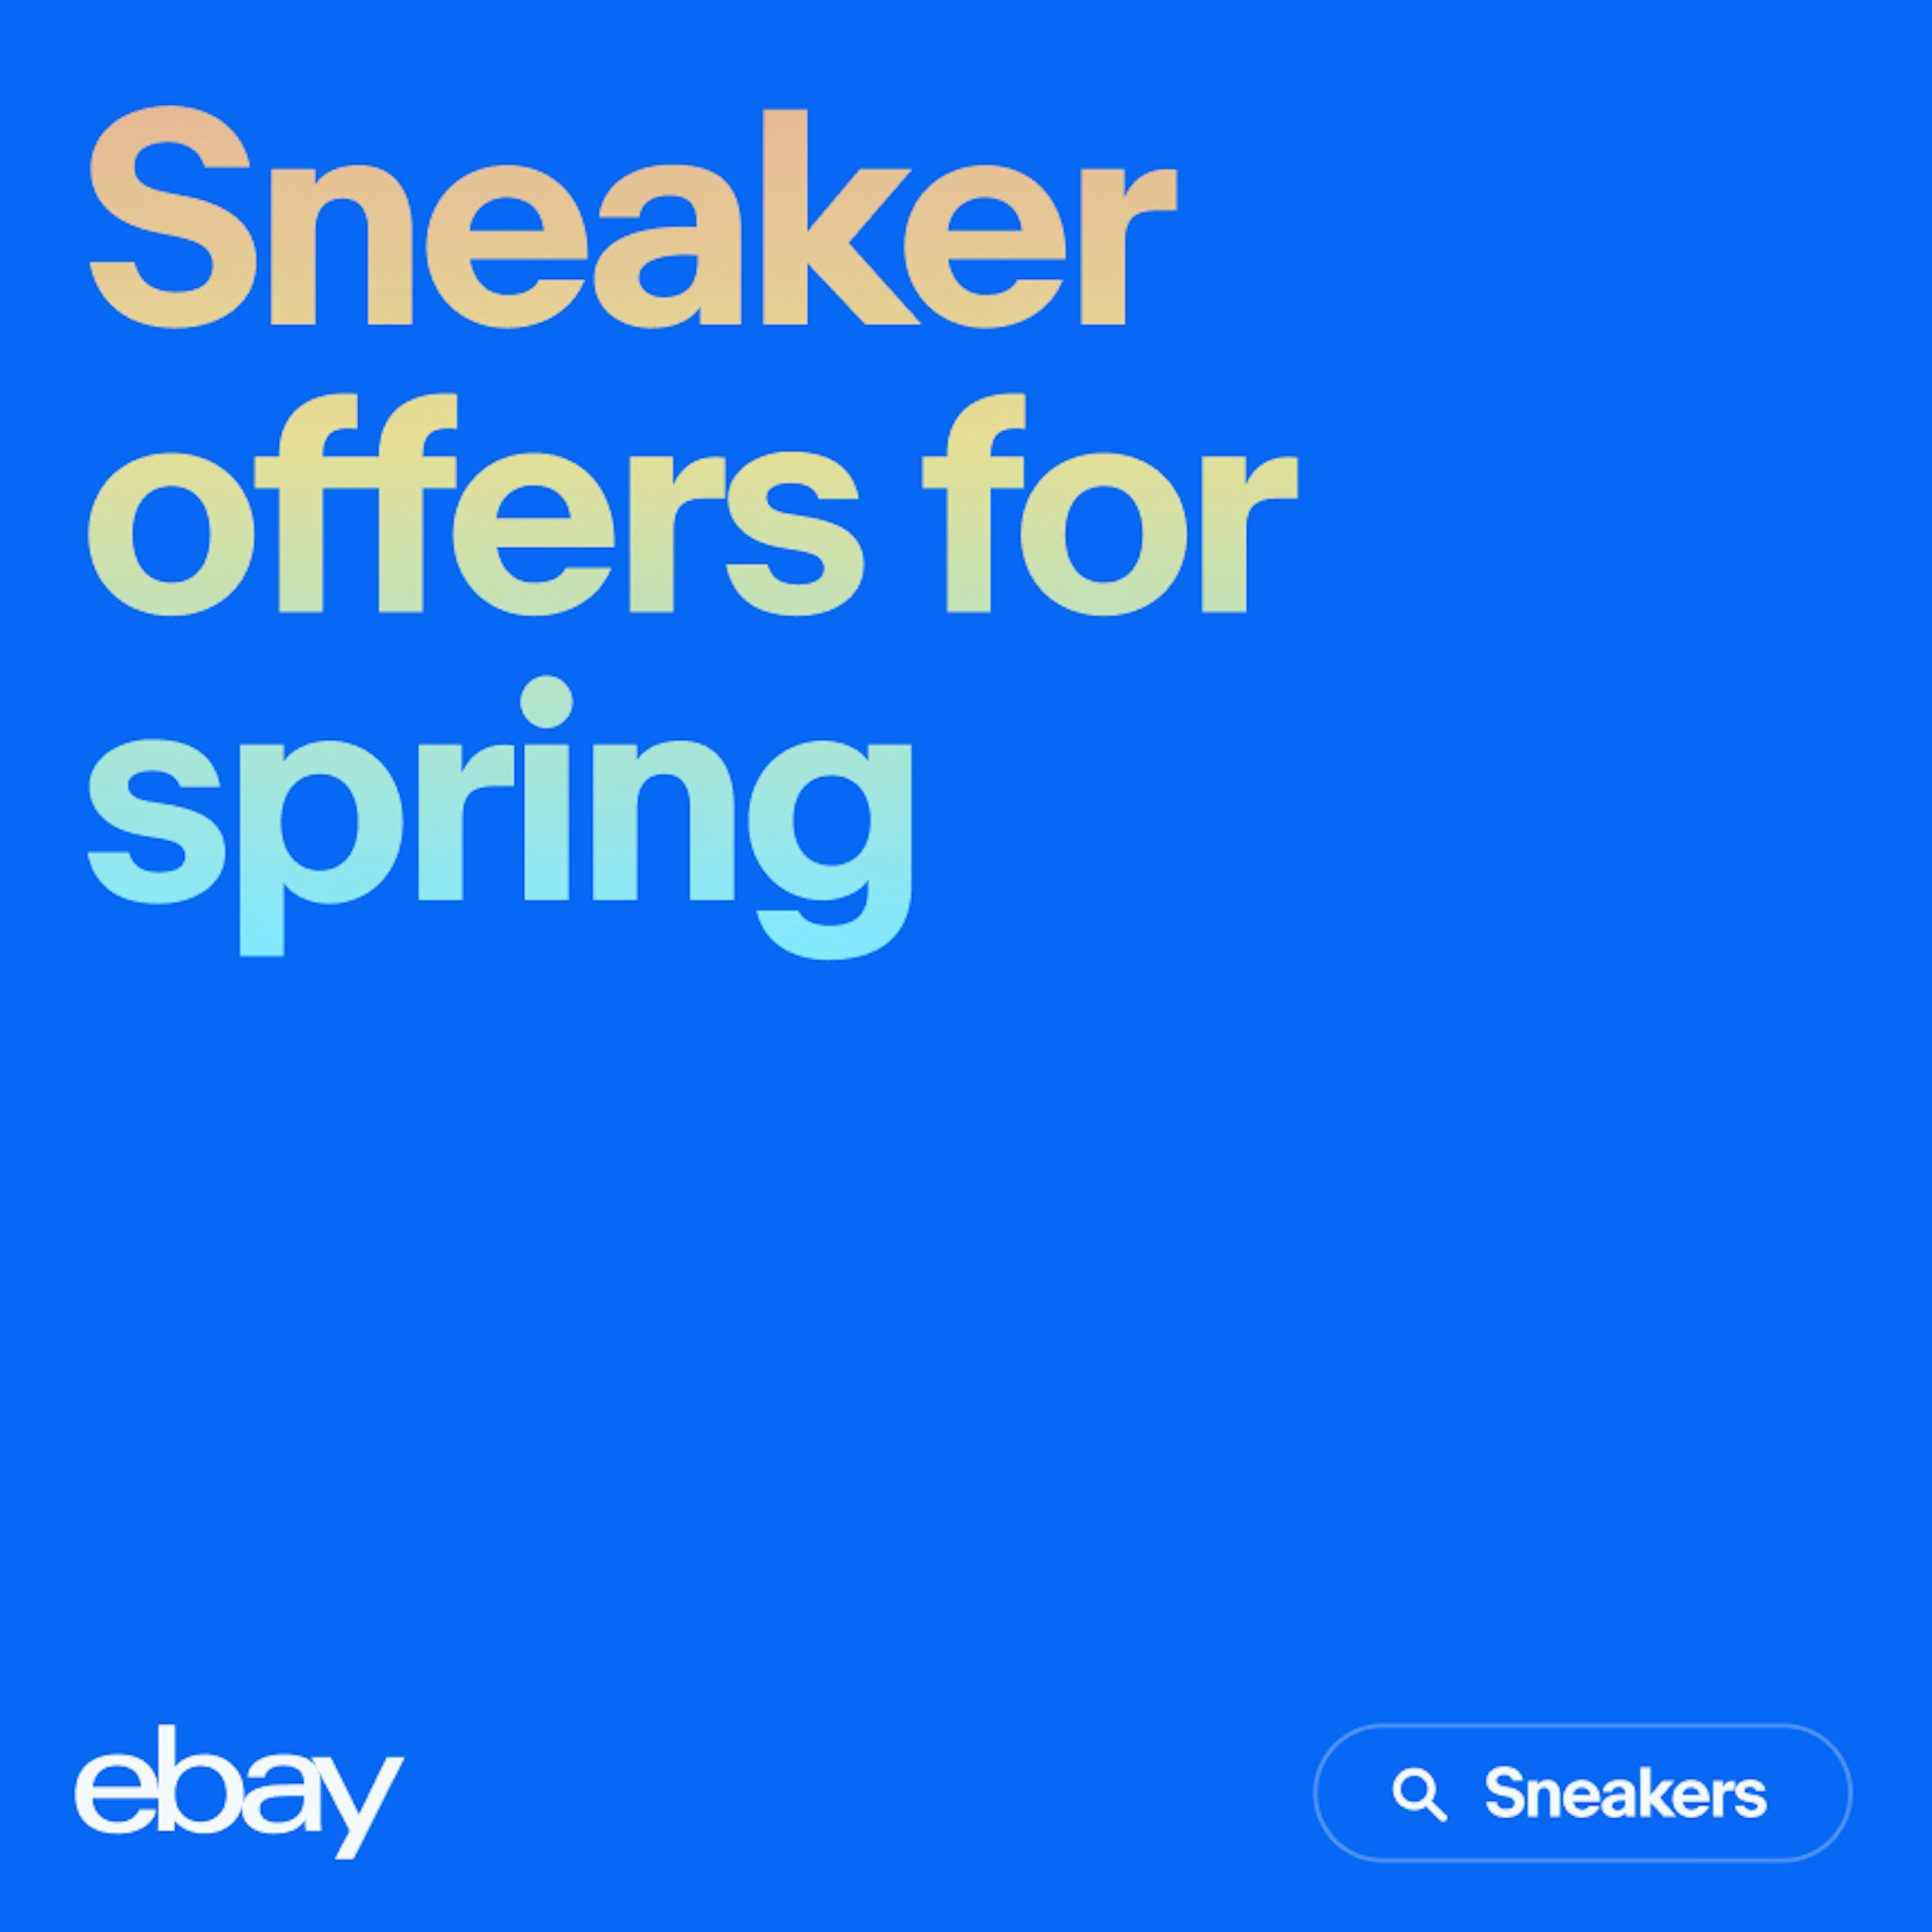 A type-based ad for sneakers. The headline text uses a orange to yellow to blue gradient on a blue background.